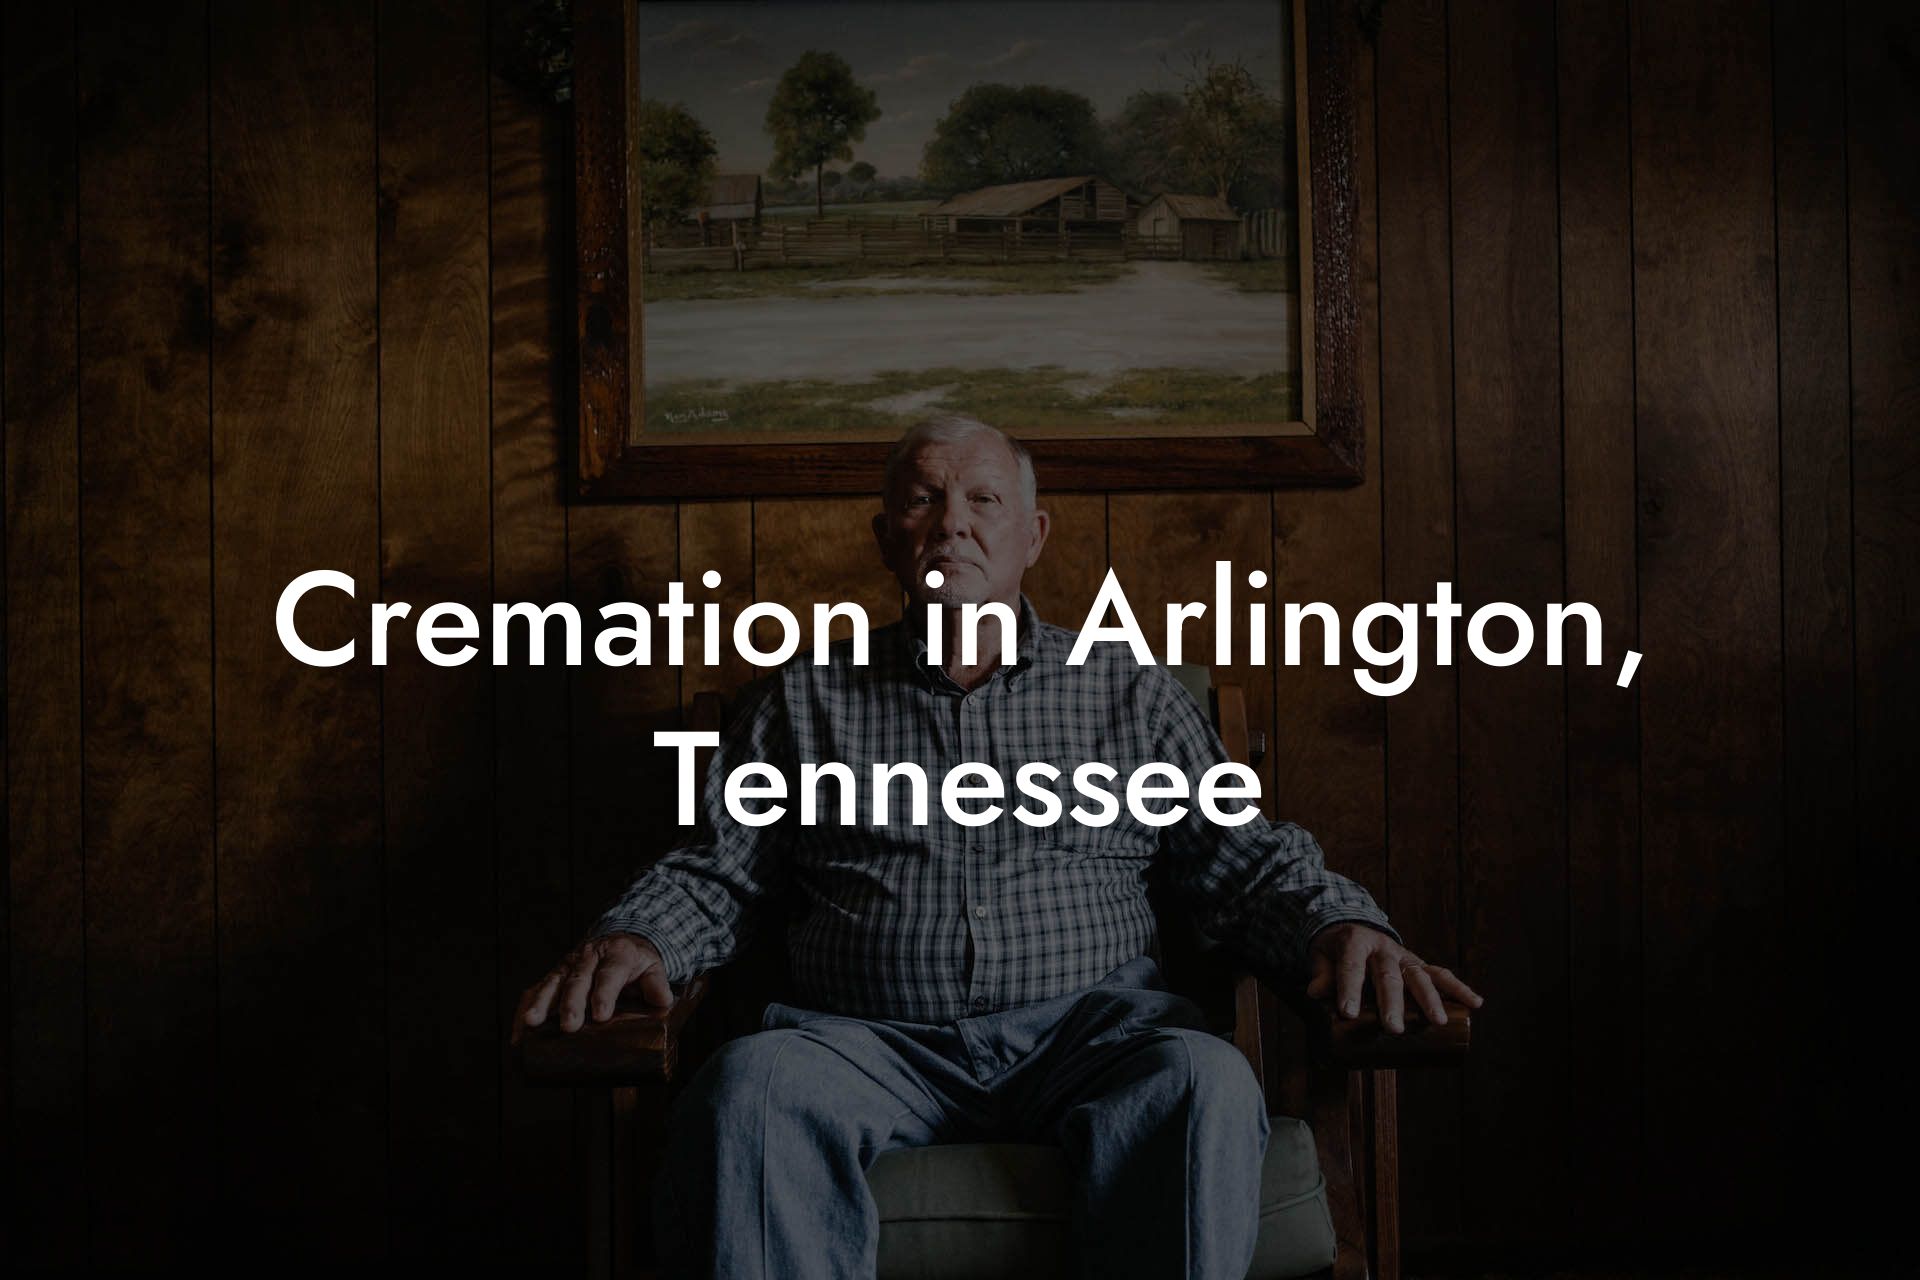 Cremation in Arlington, Tennessee